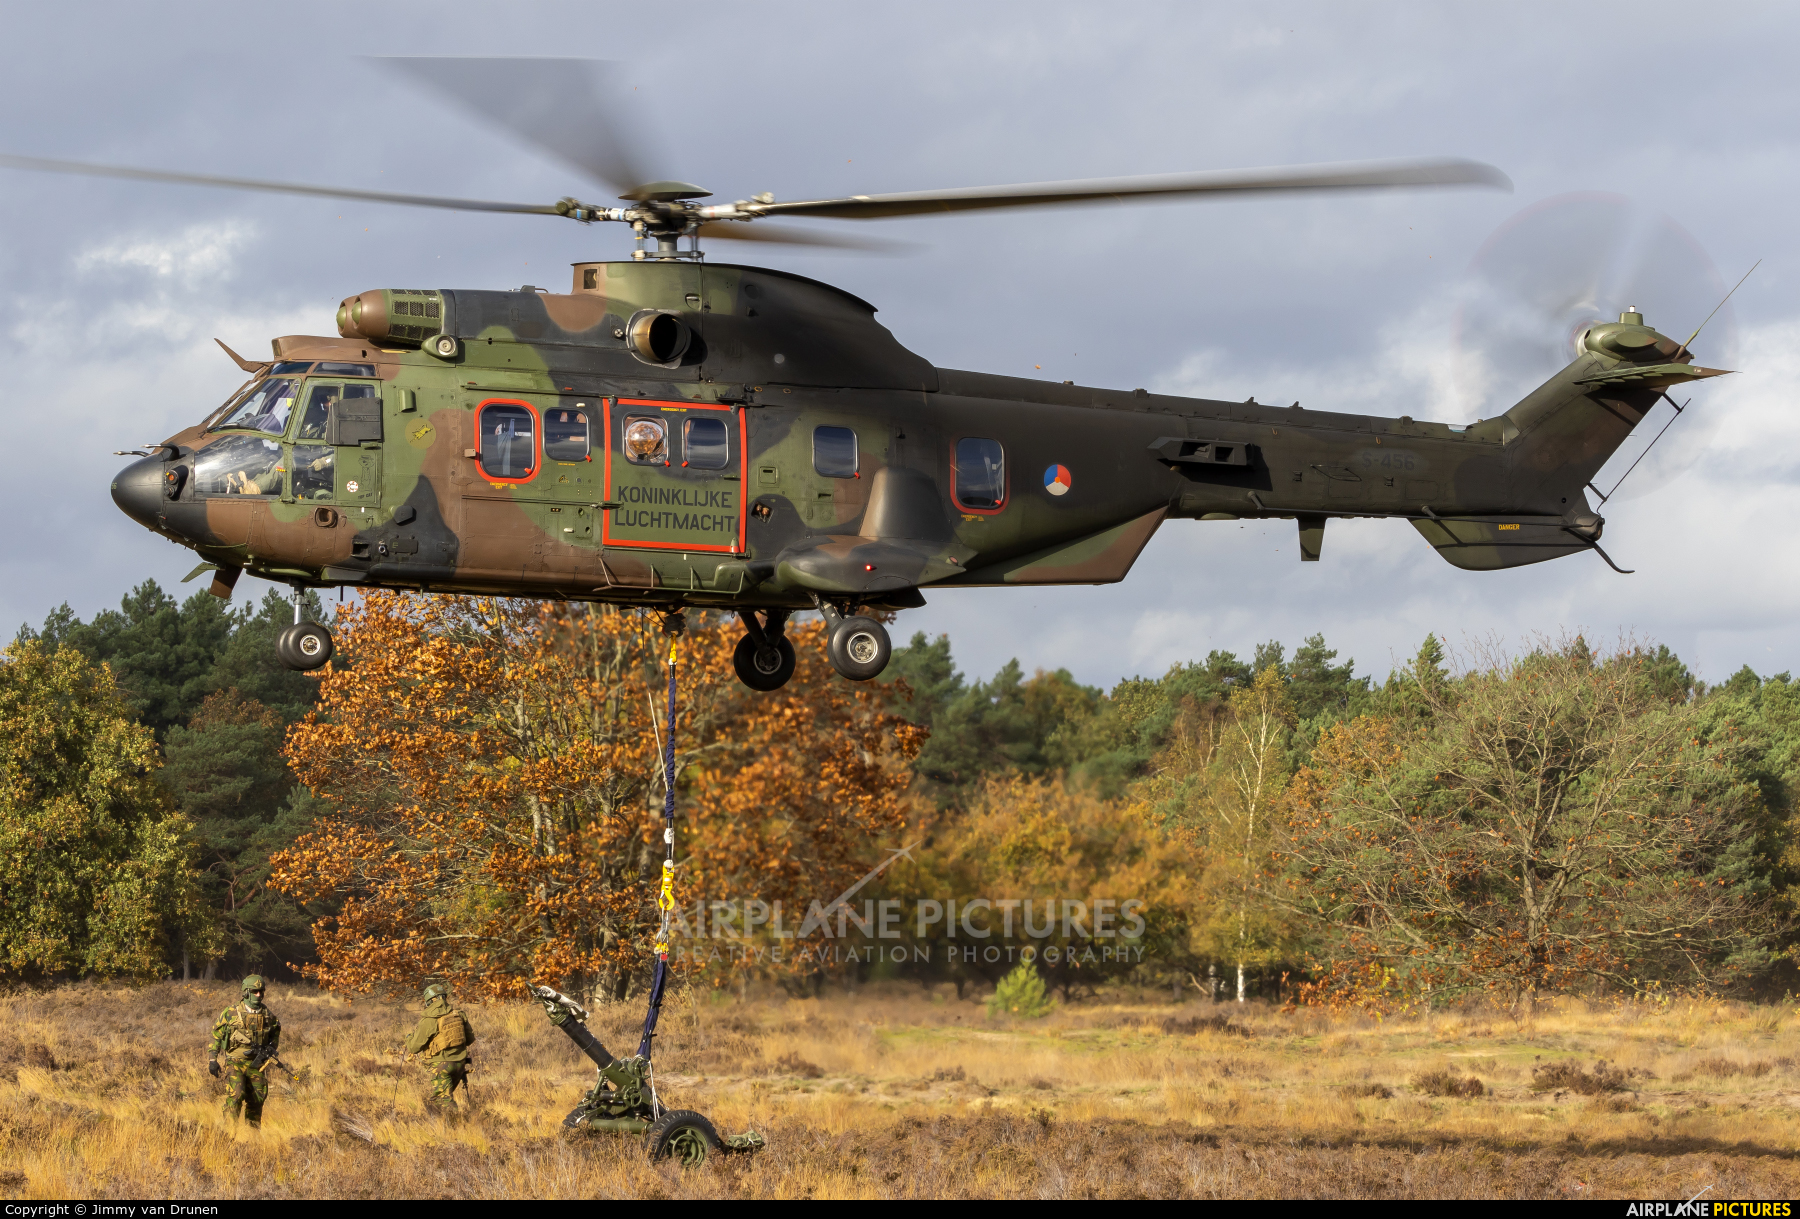 Netherlands - Air Force S-456 aircraft at GLV-5 Training area